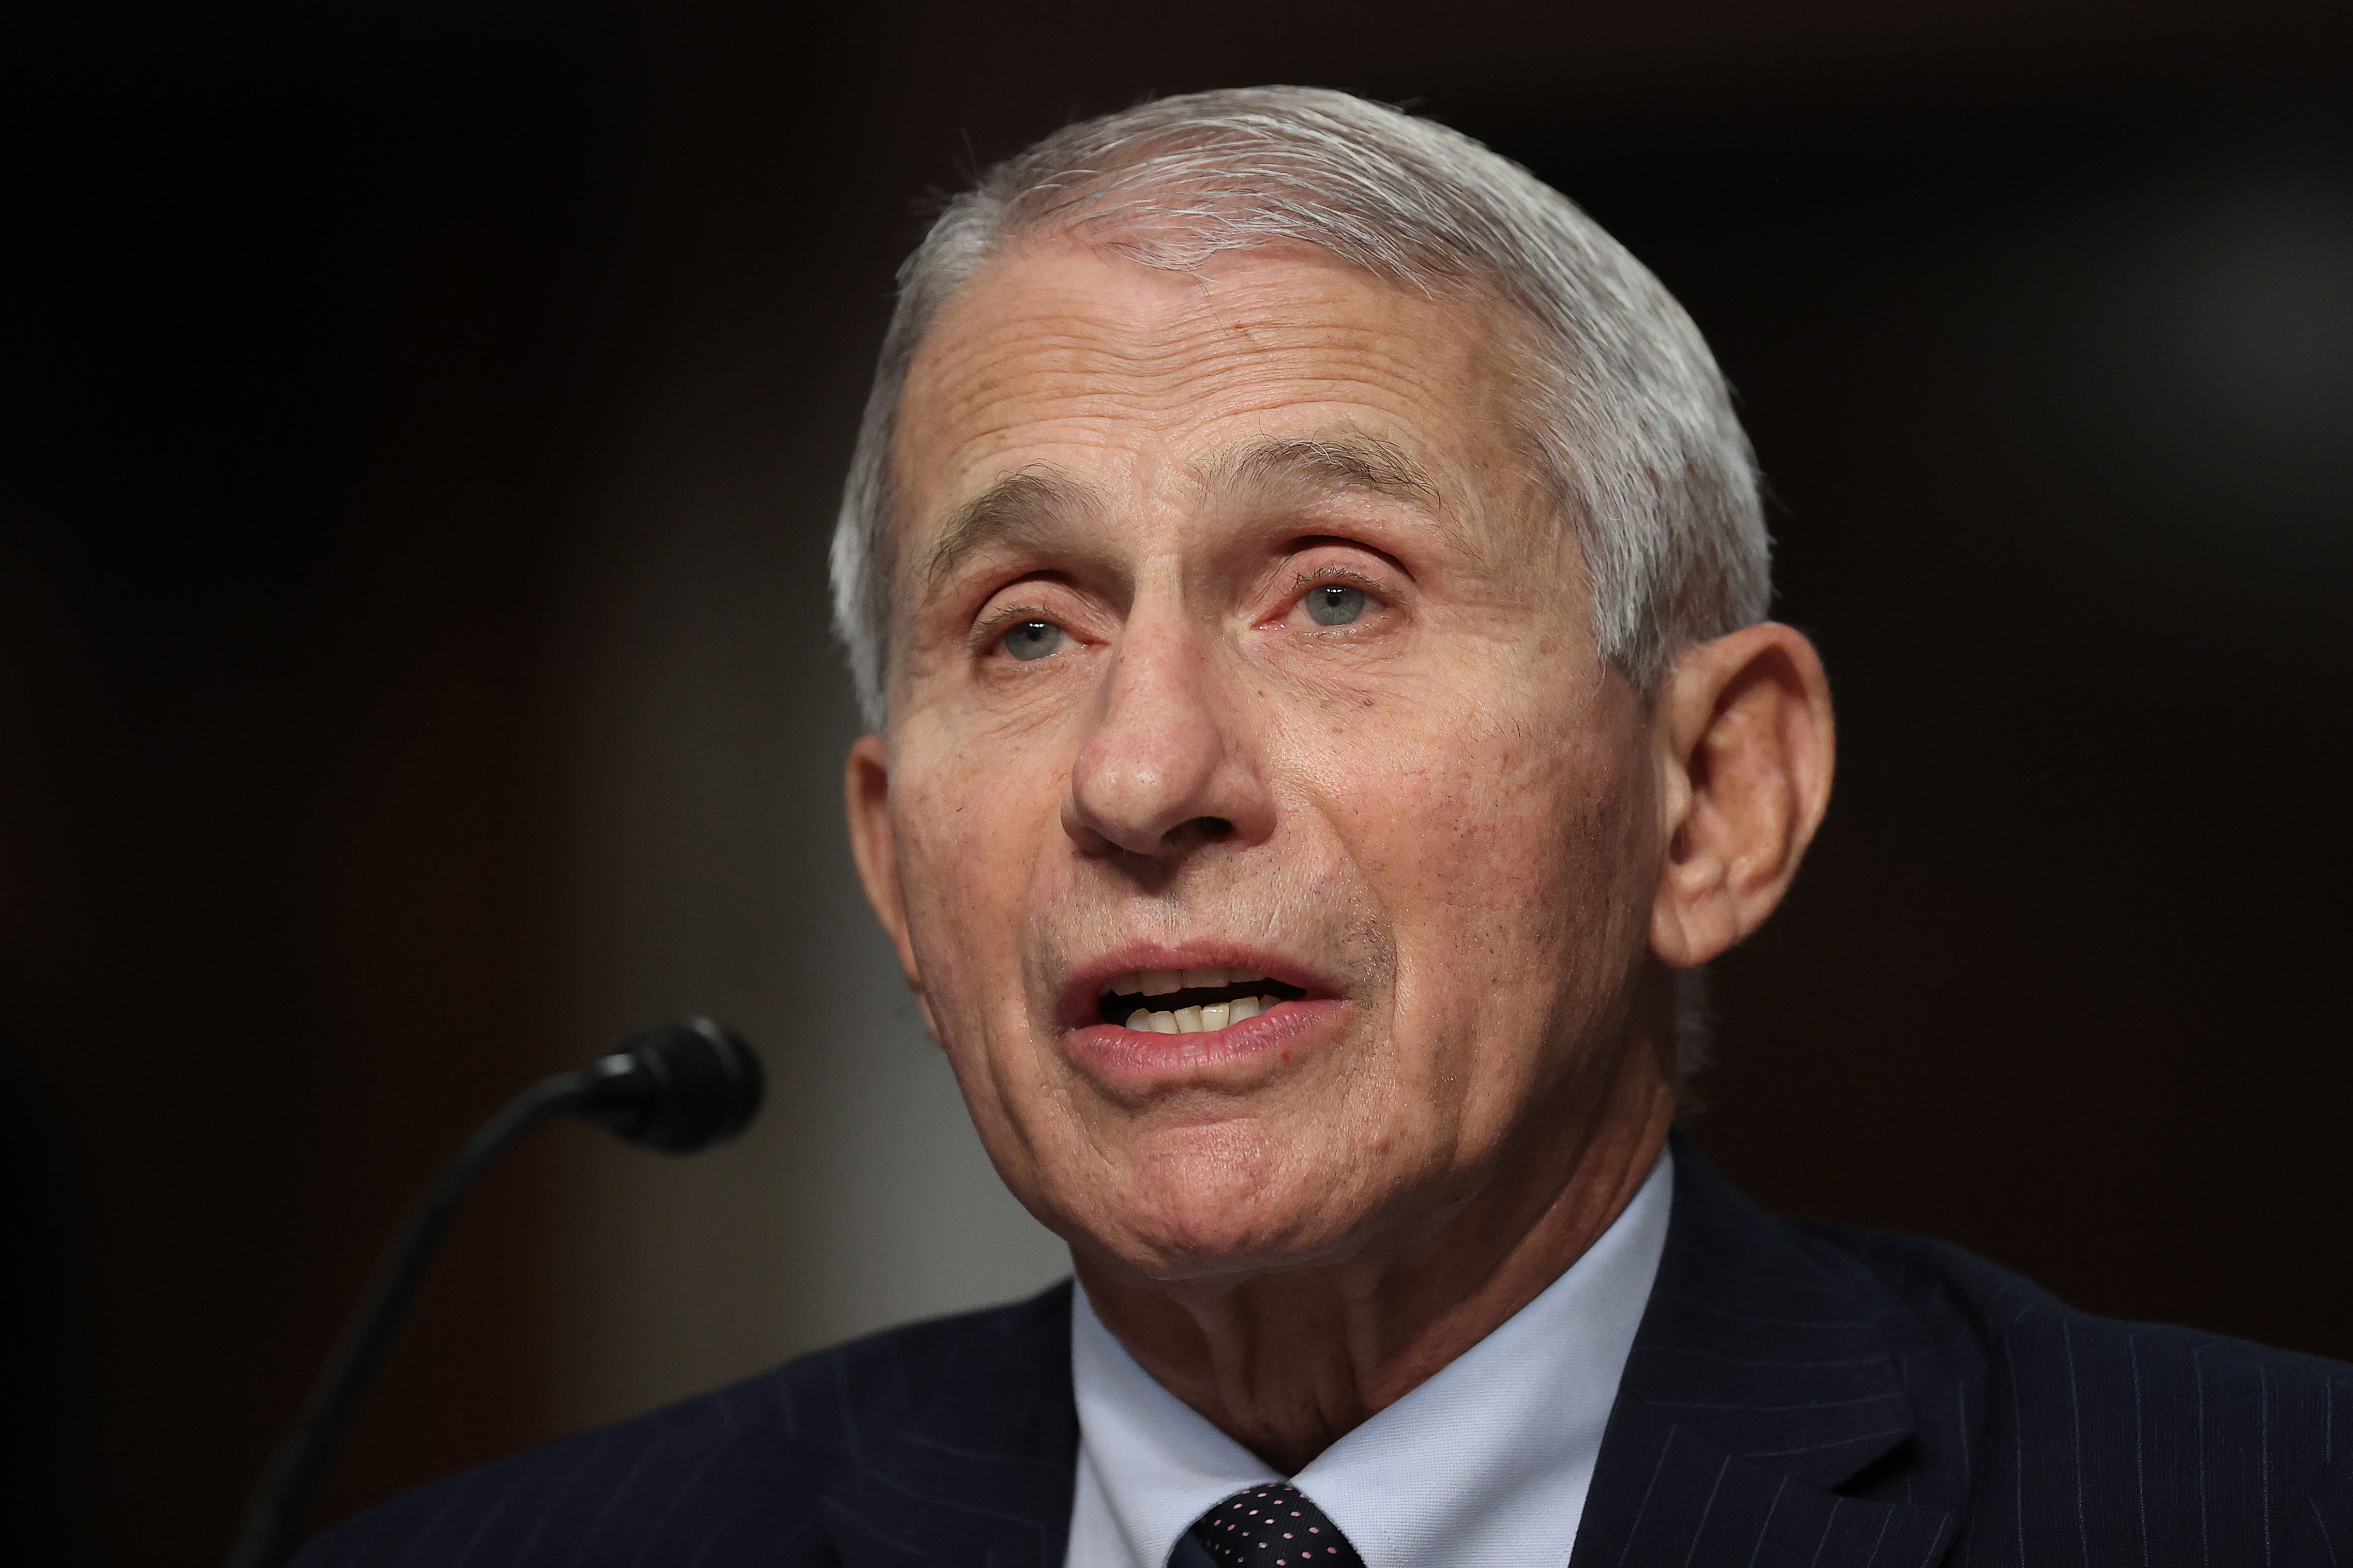 Dr. Anthony Fauci, director of the National Institute of Allergy and Infectious Diseases, testifies in Washington, DC, on November 4.